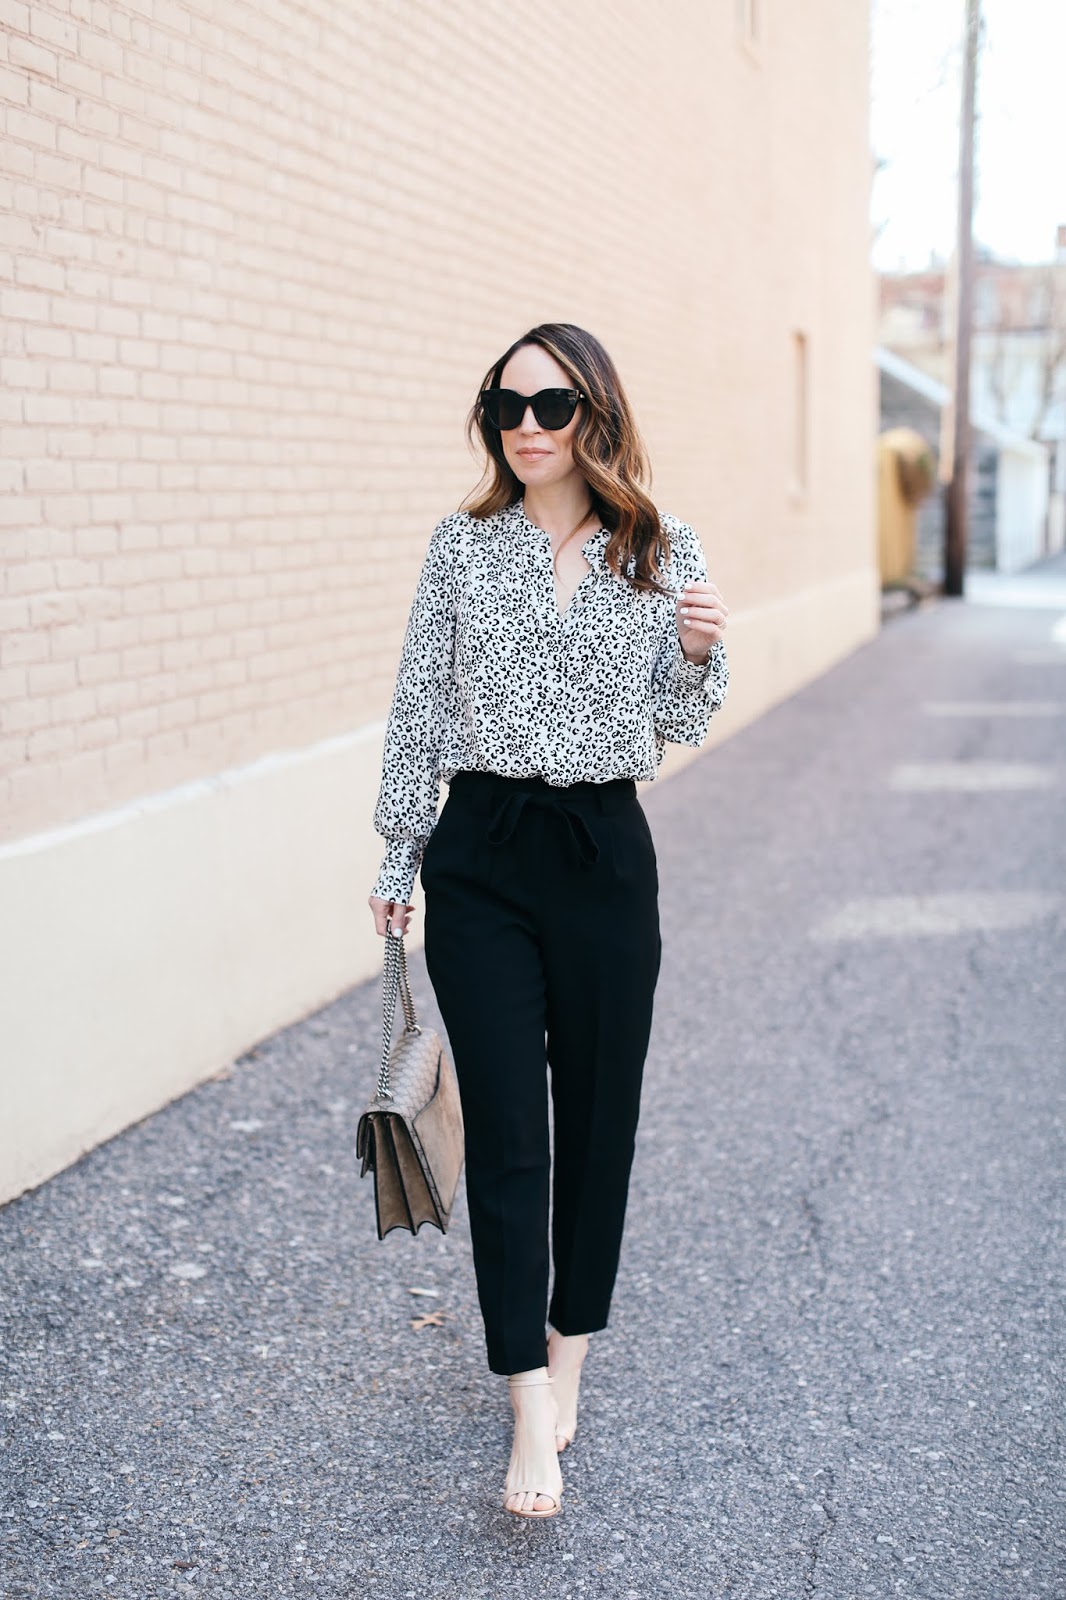 A Simple Black and White Workwear Look - alittlebitetc